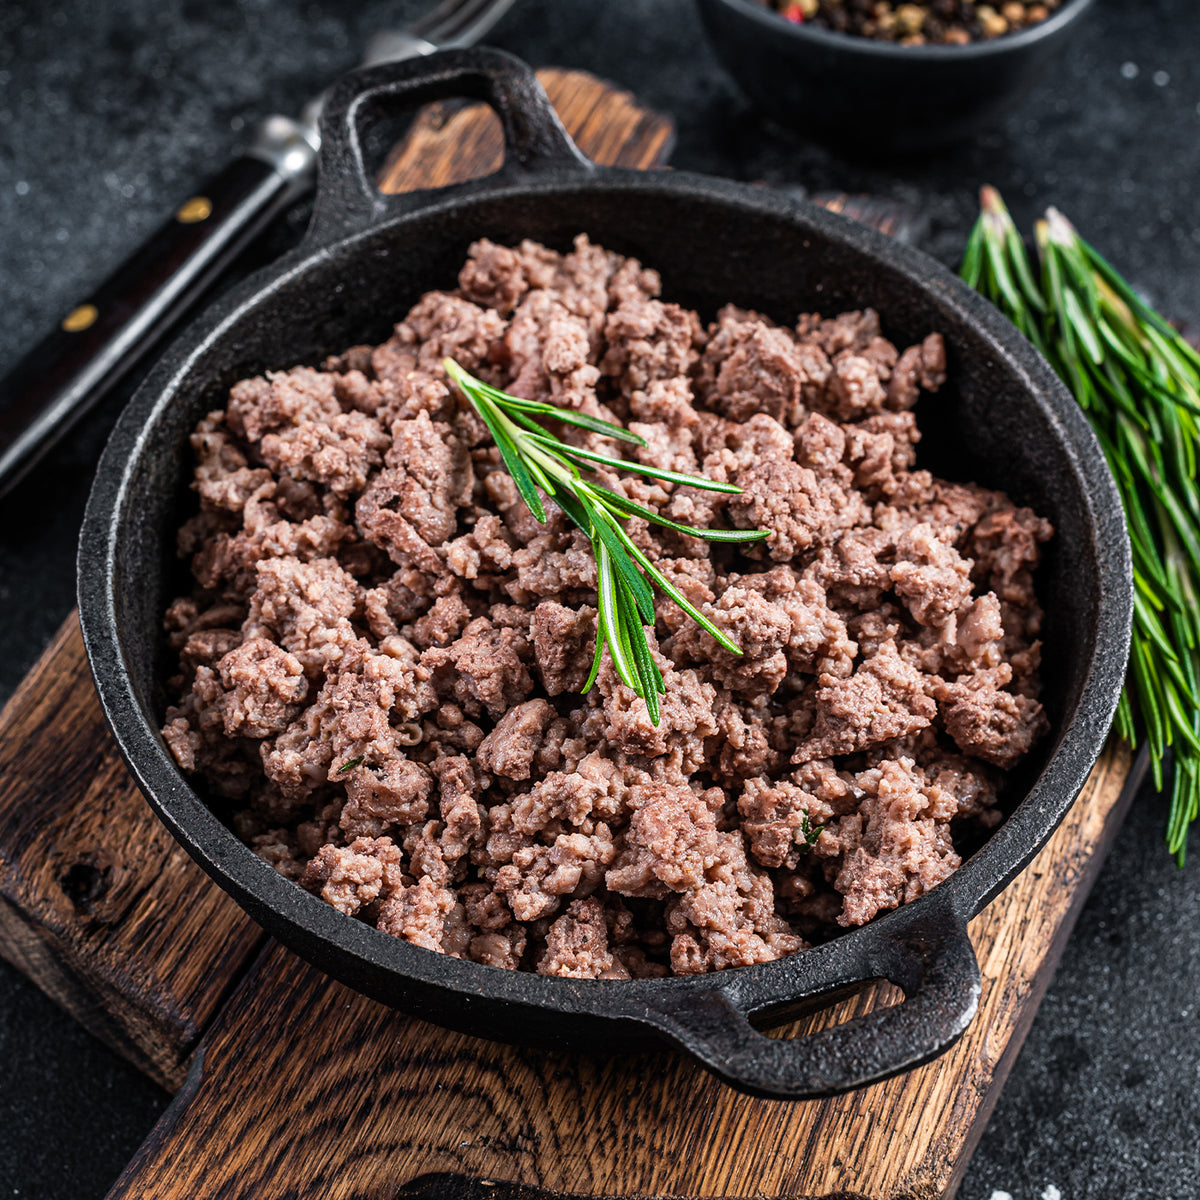 10lb Prestige® 90/10 Ground Beef: Lean and Delicious